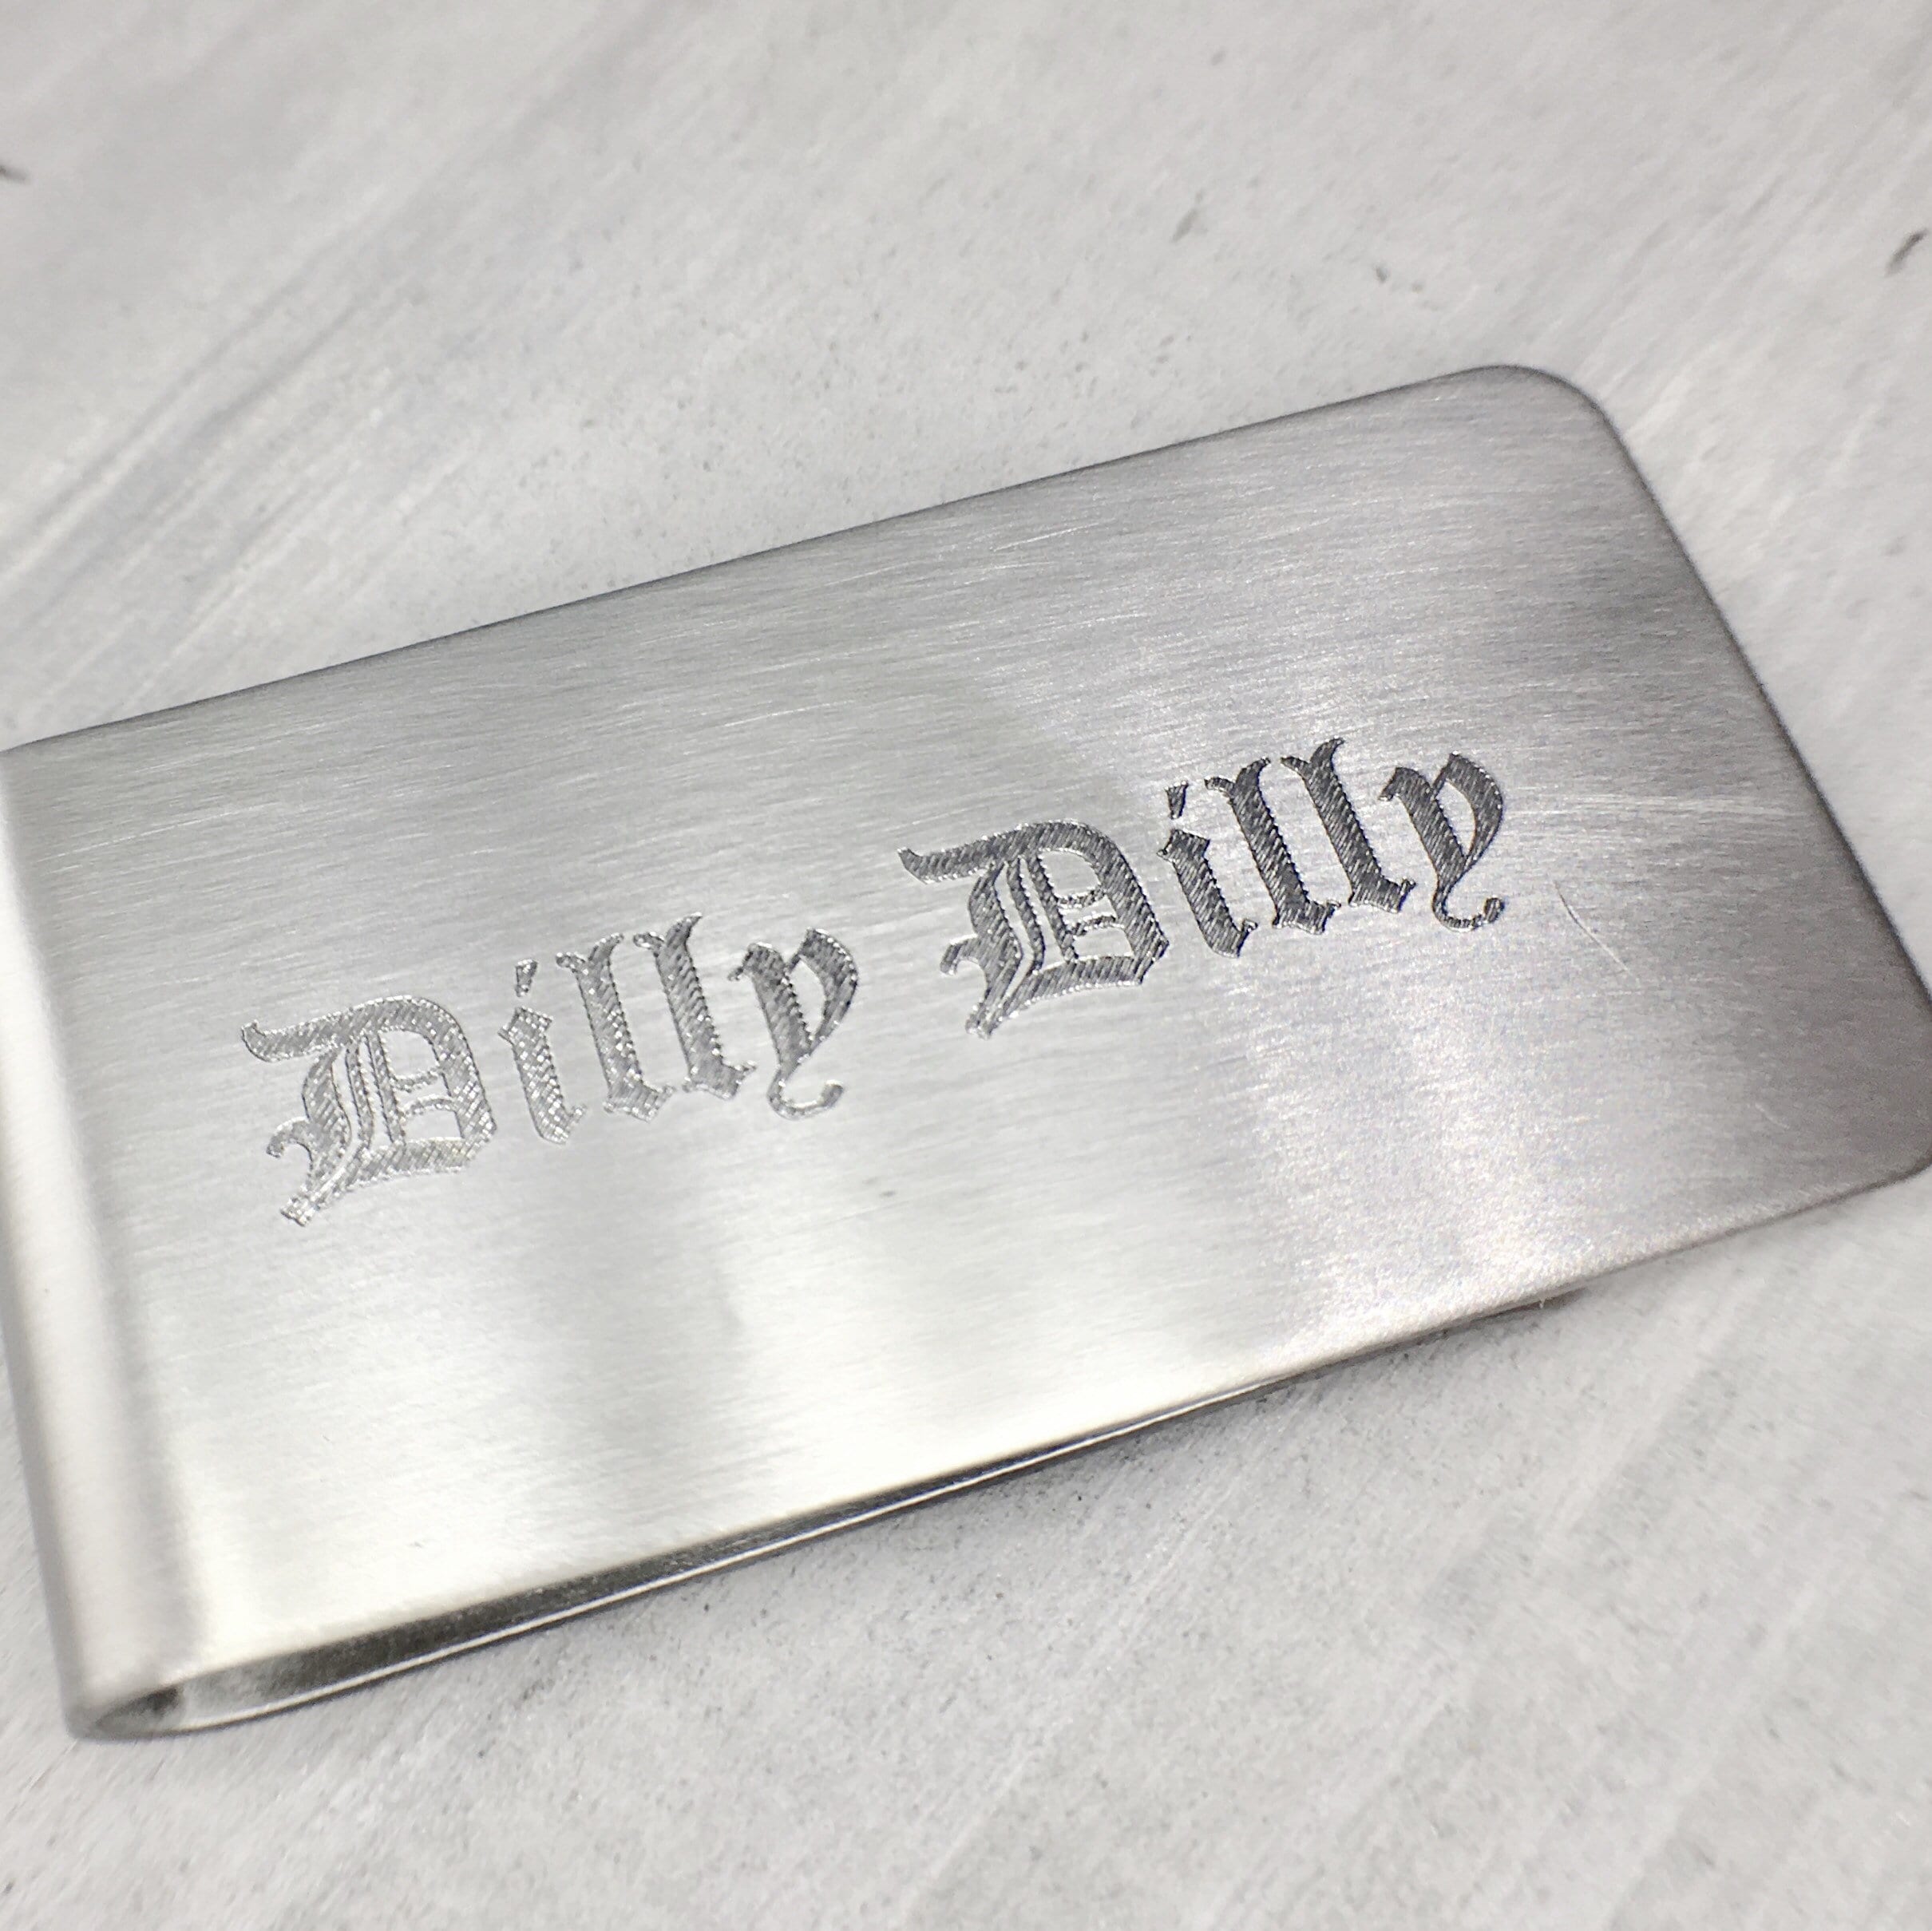 Dilly Dilly Money Clip Gag Gift Personalized Money Clip | Etsy